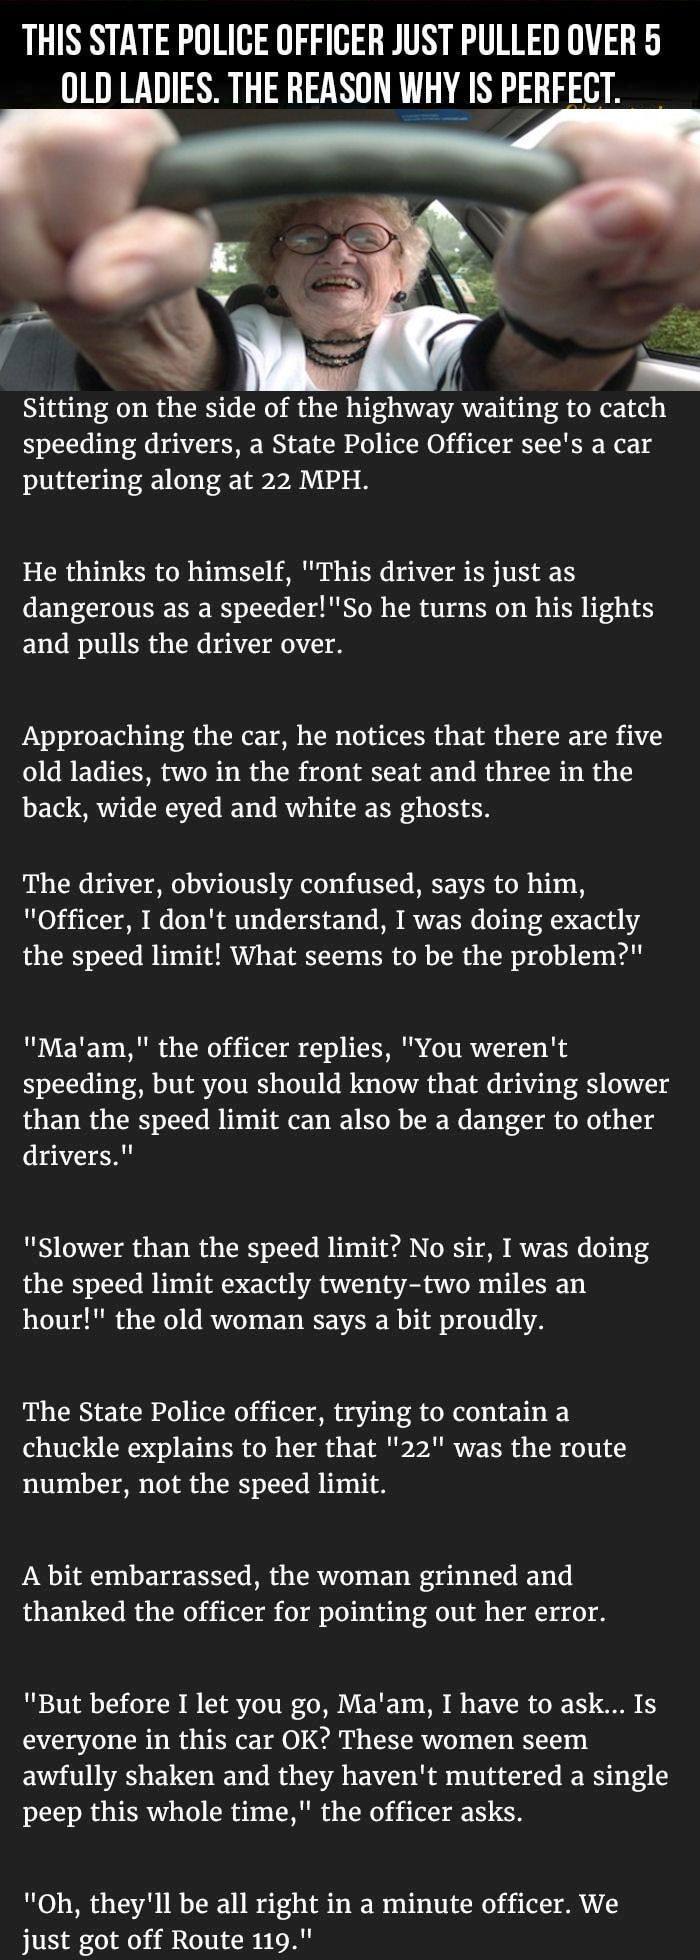 This State Officer Pulled Over 5 Old Ladies The Reason Why Is Perfect funny quotes quote jokes story l